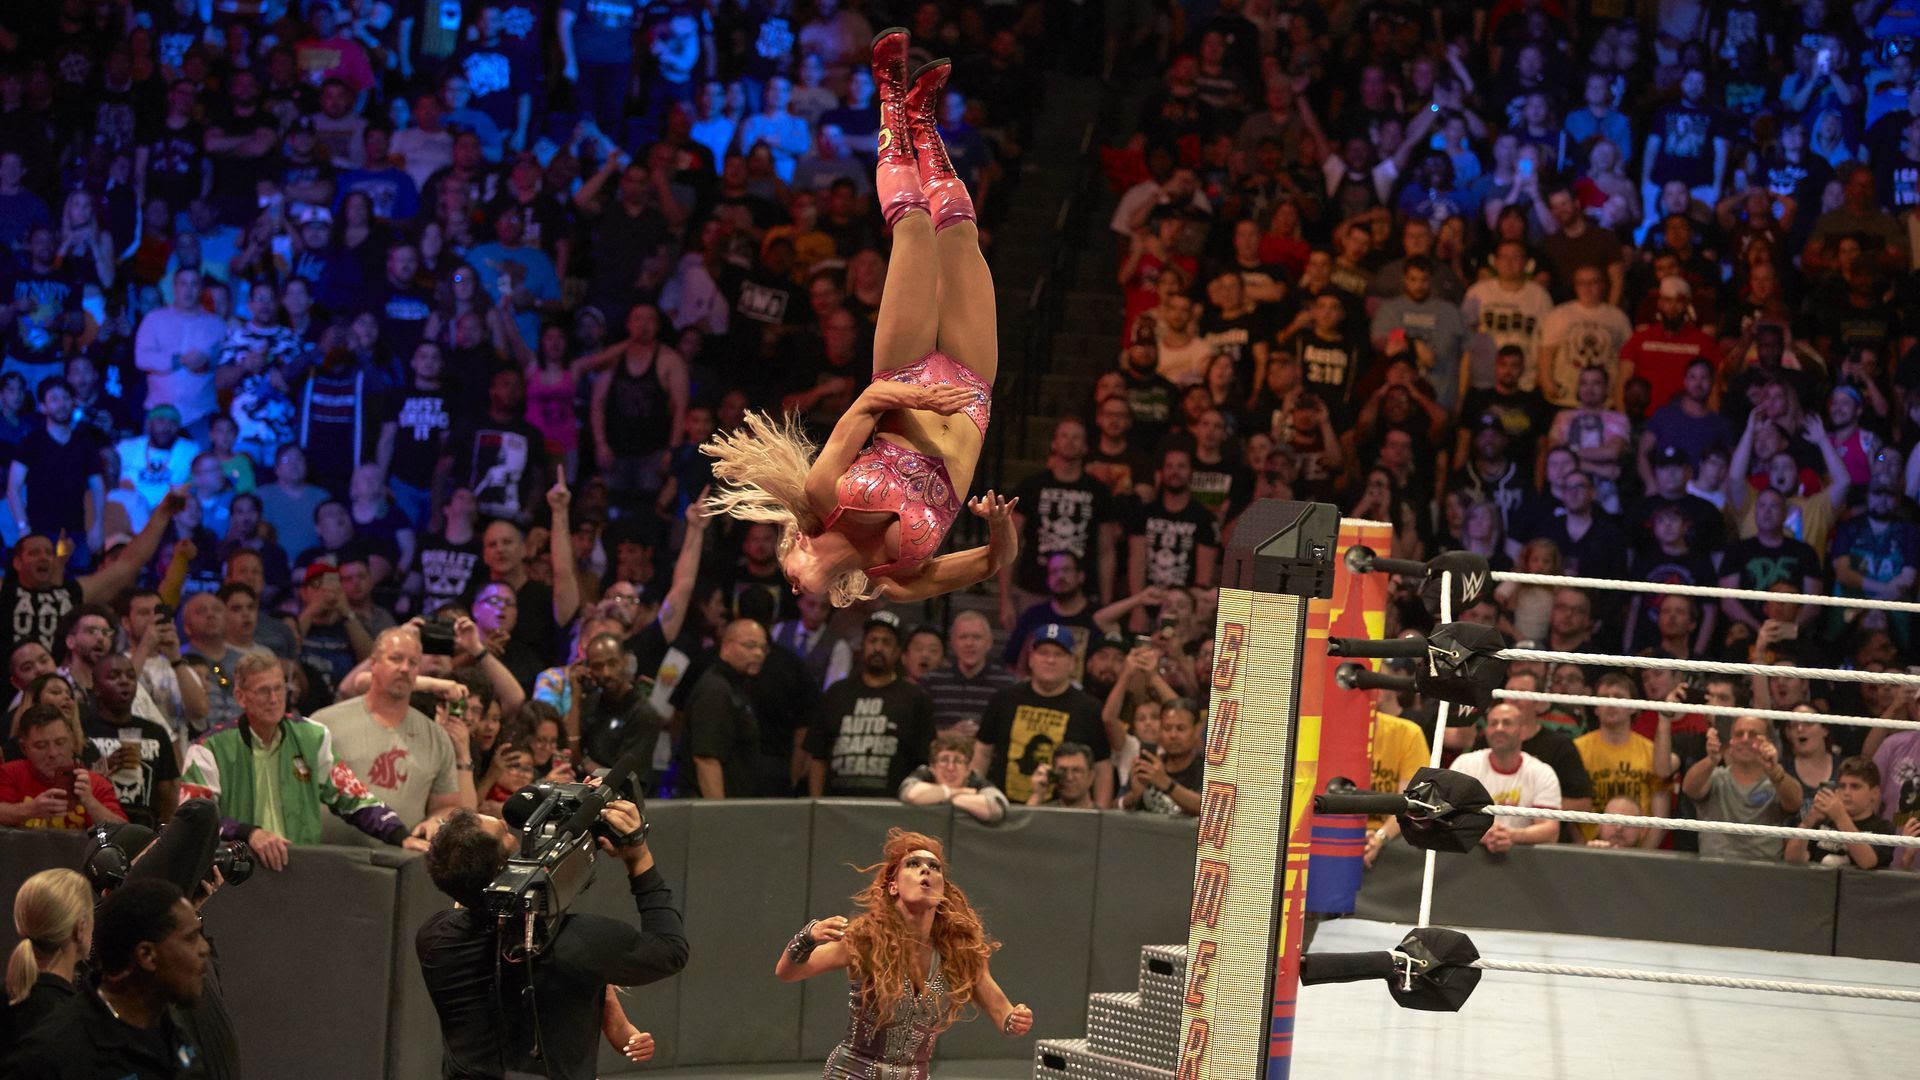 Charlotte Flair spins midair vs. Becky Lynch during SummerSlam in 2018.